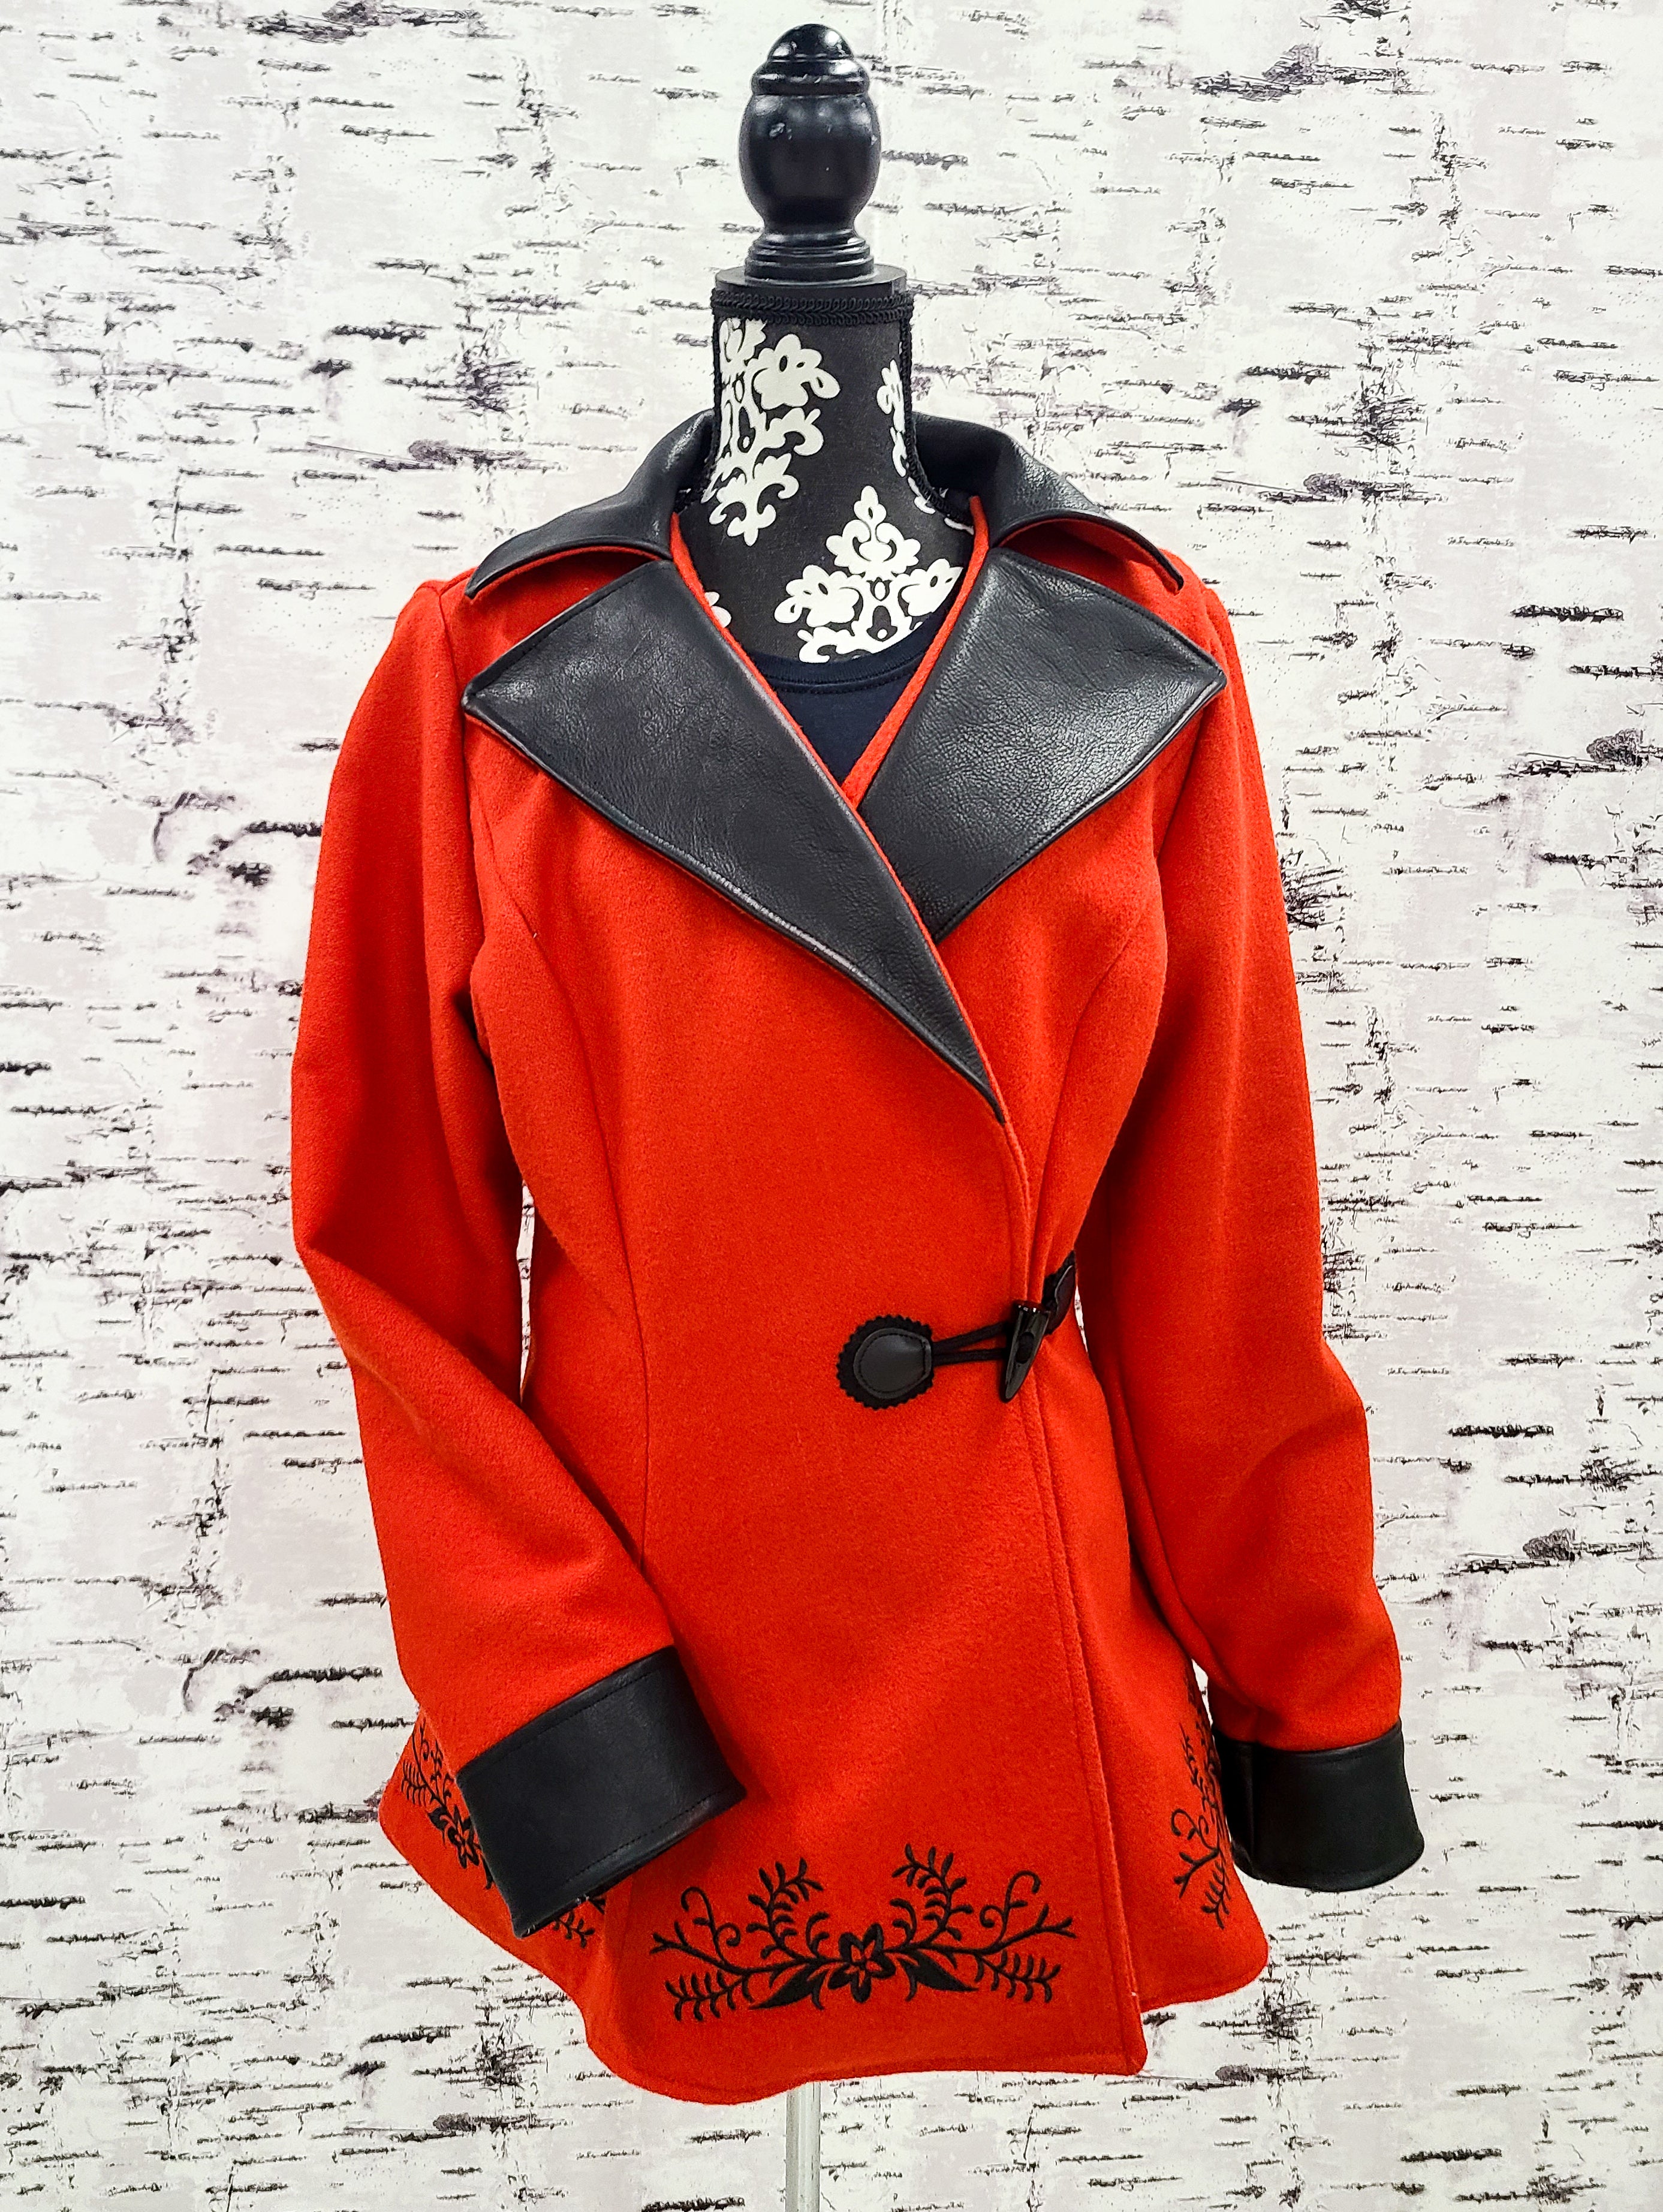 Handmade Red Wool Coat w/ Floral Design and Leather Accents